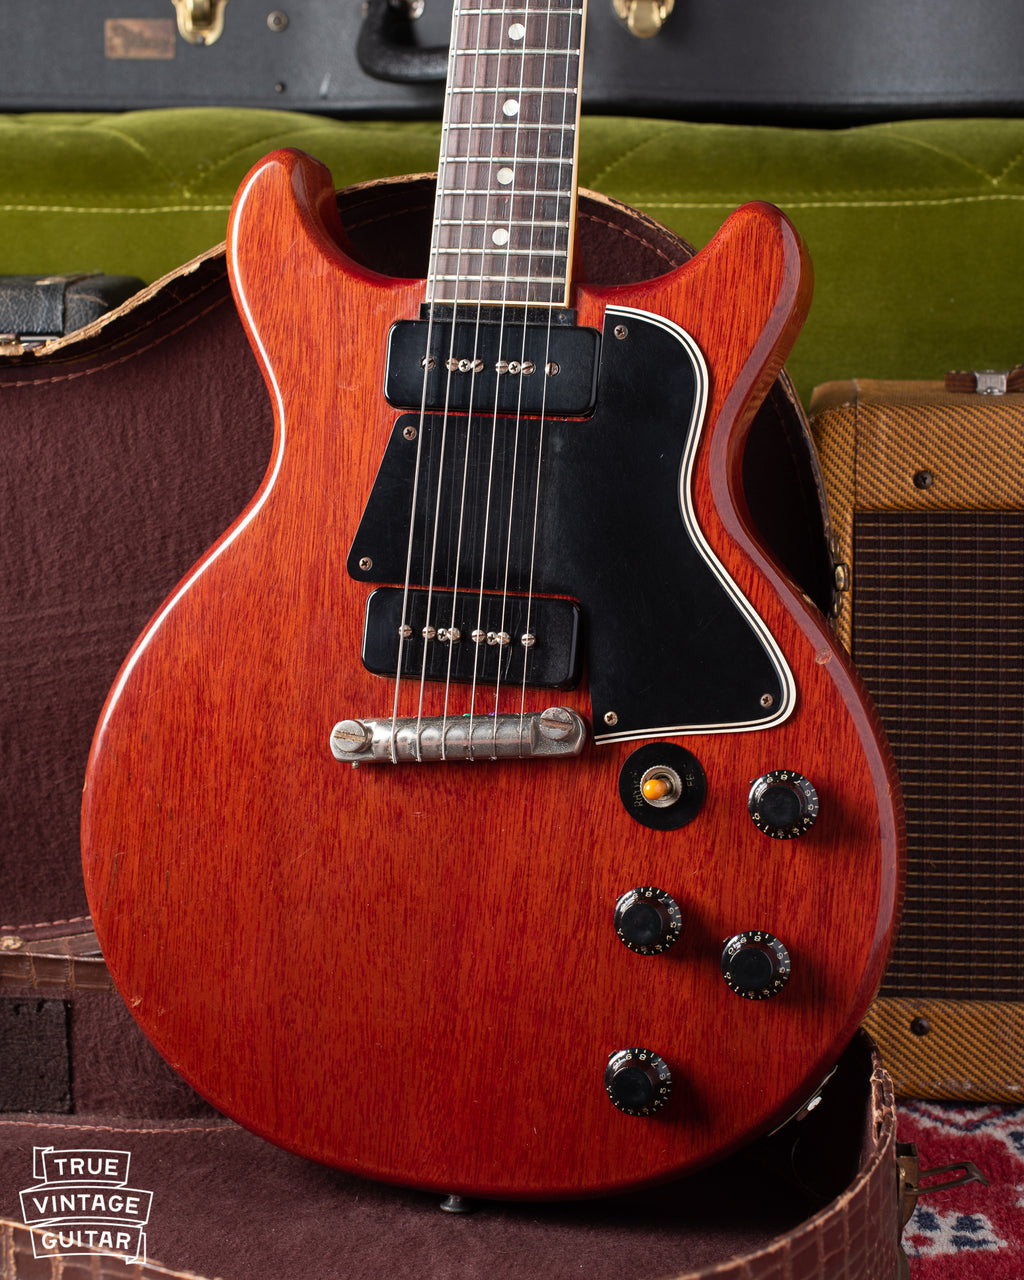 Gibson Les Paul Special 1960 red guitar, two P-90 pickups, wrap tail bridge